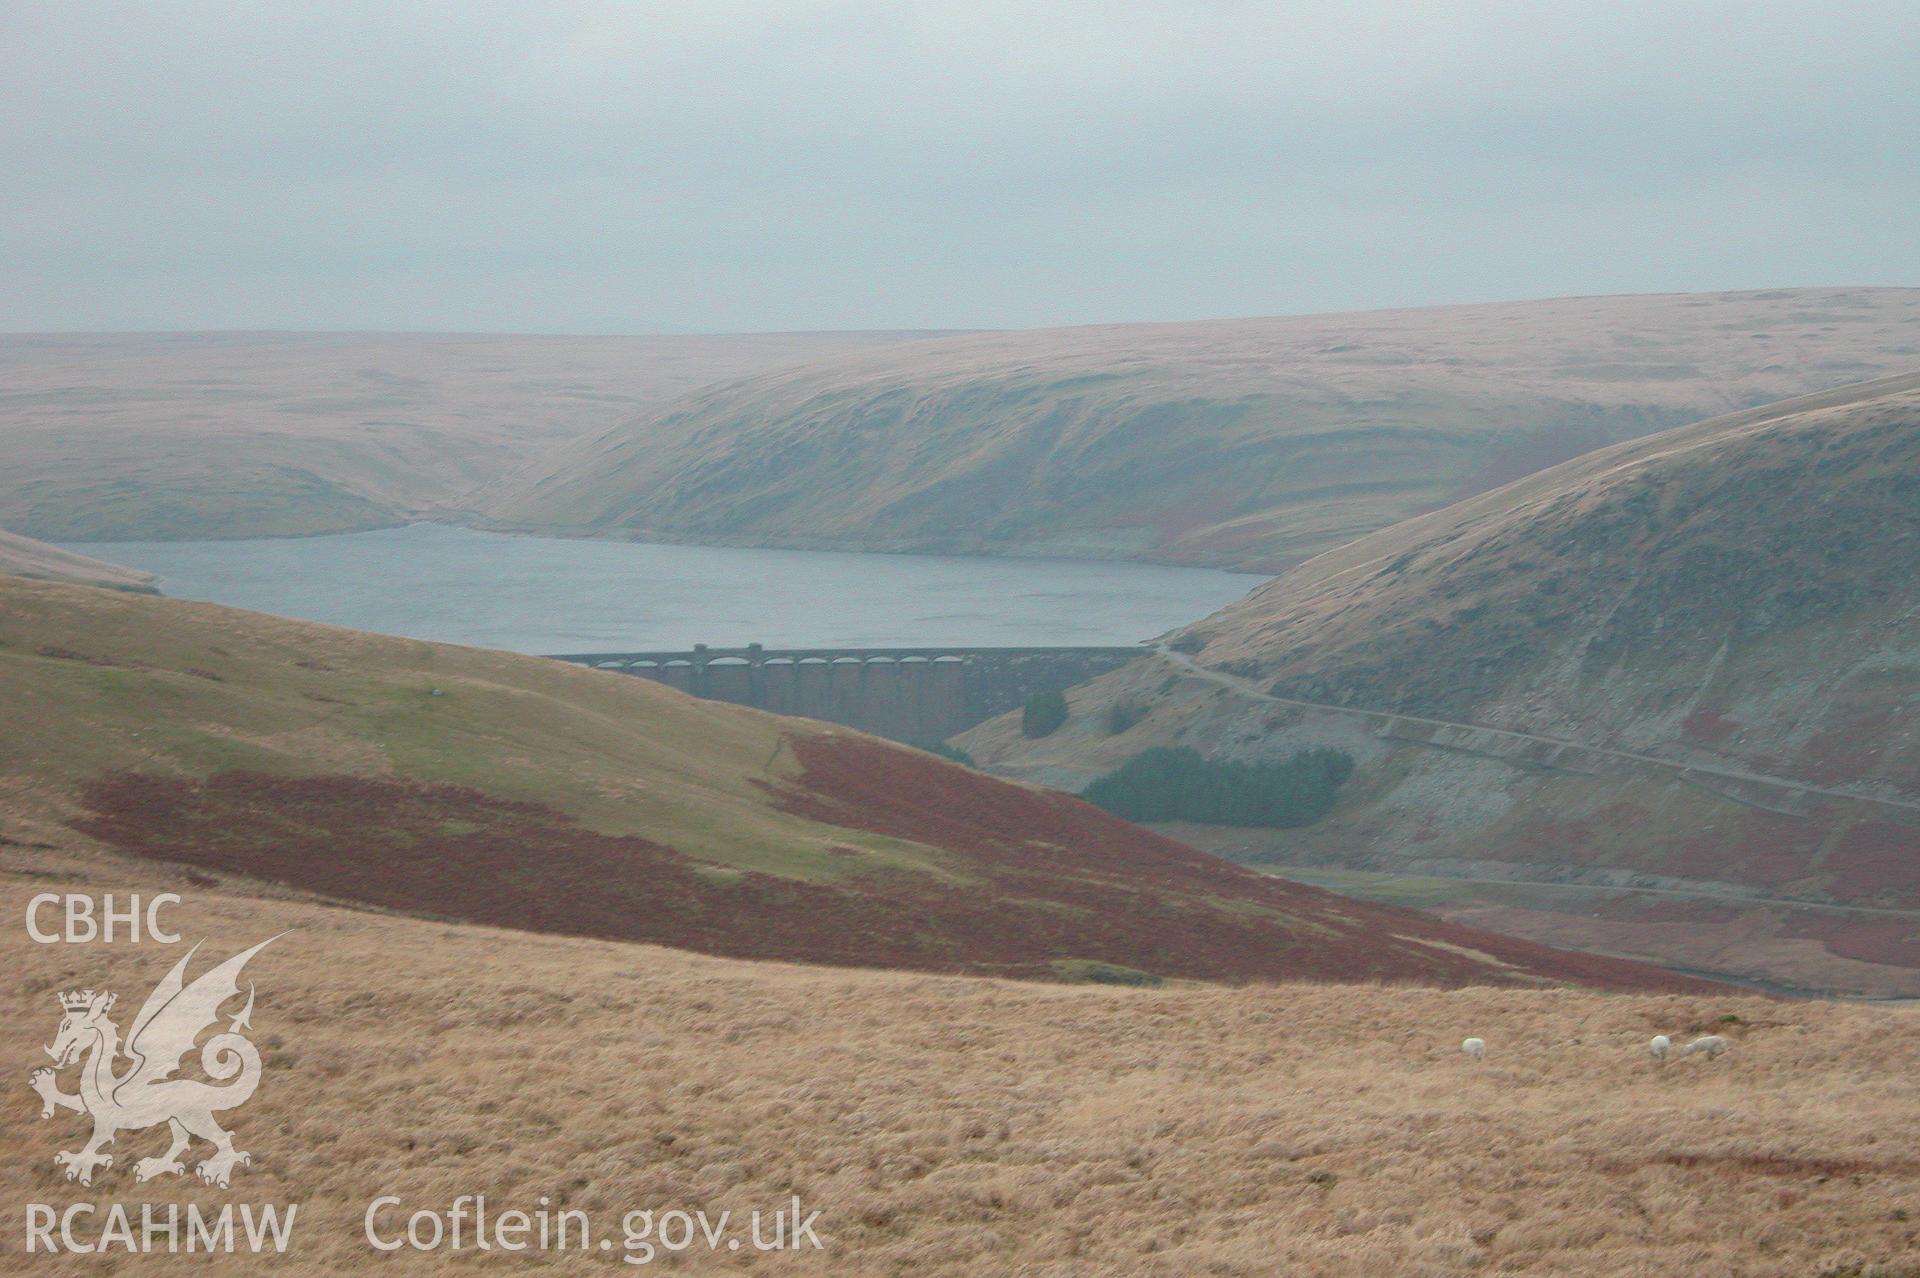 Digital photograph of Claerwen Dam taken on 12/12/2003 by Cambrian Archaeological Projects during the Elan Valley 2003-4 Upland Survey